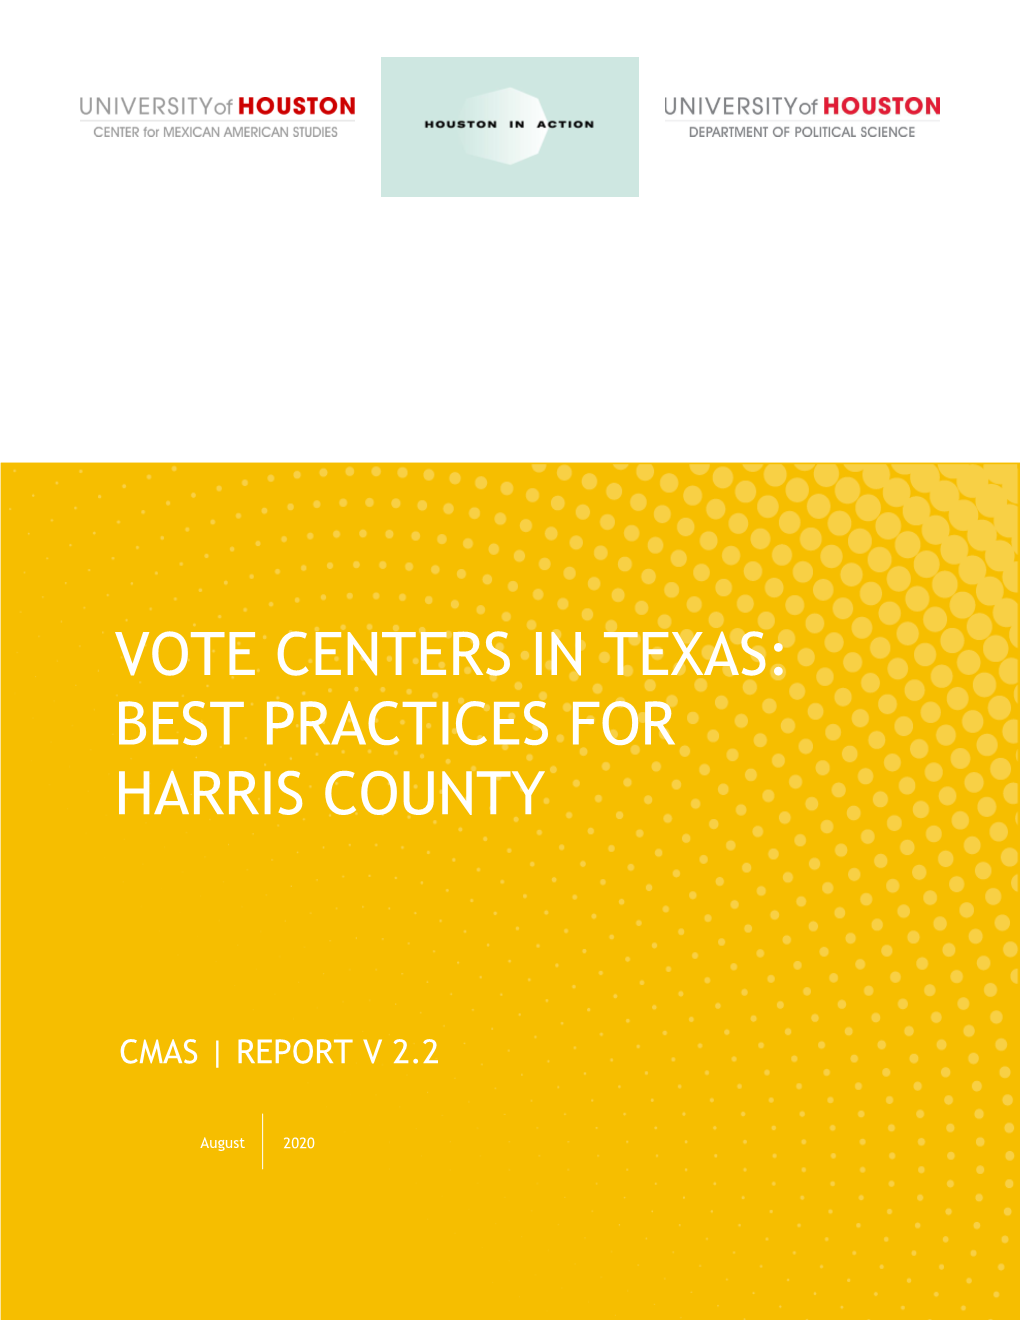 Vote Centers in Texas: Best Practices for Harris County